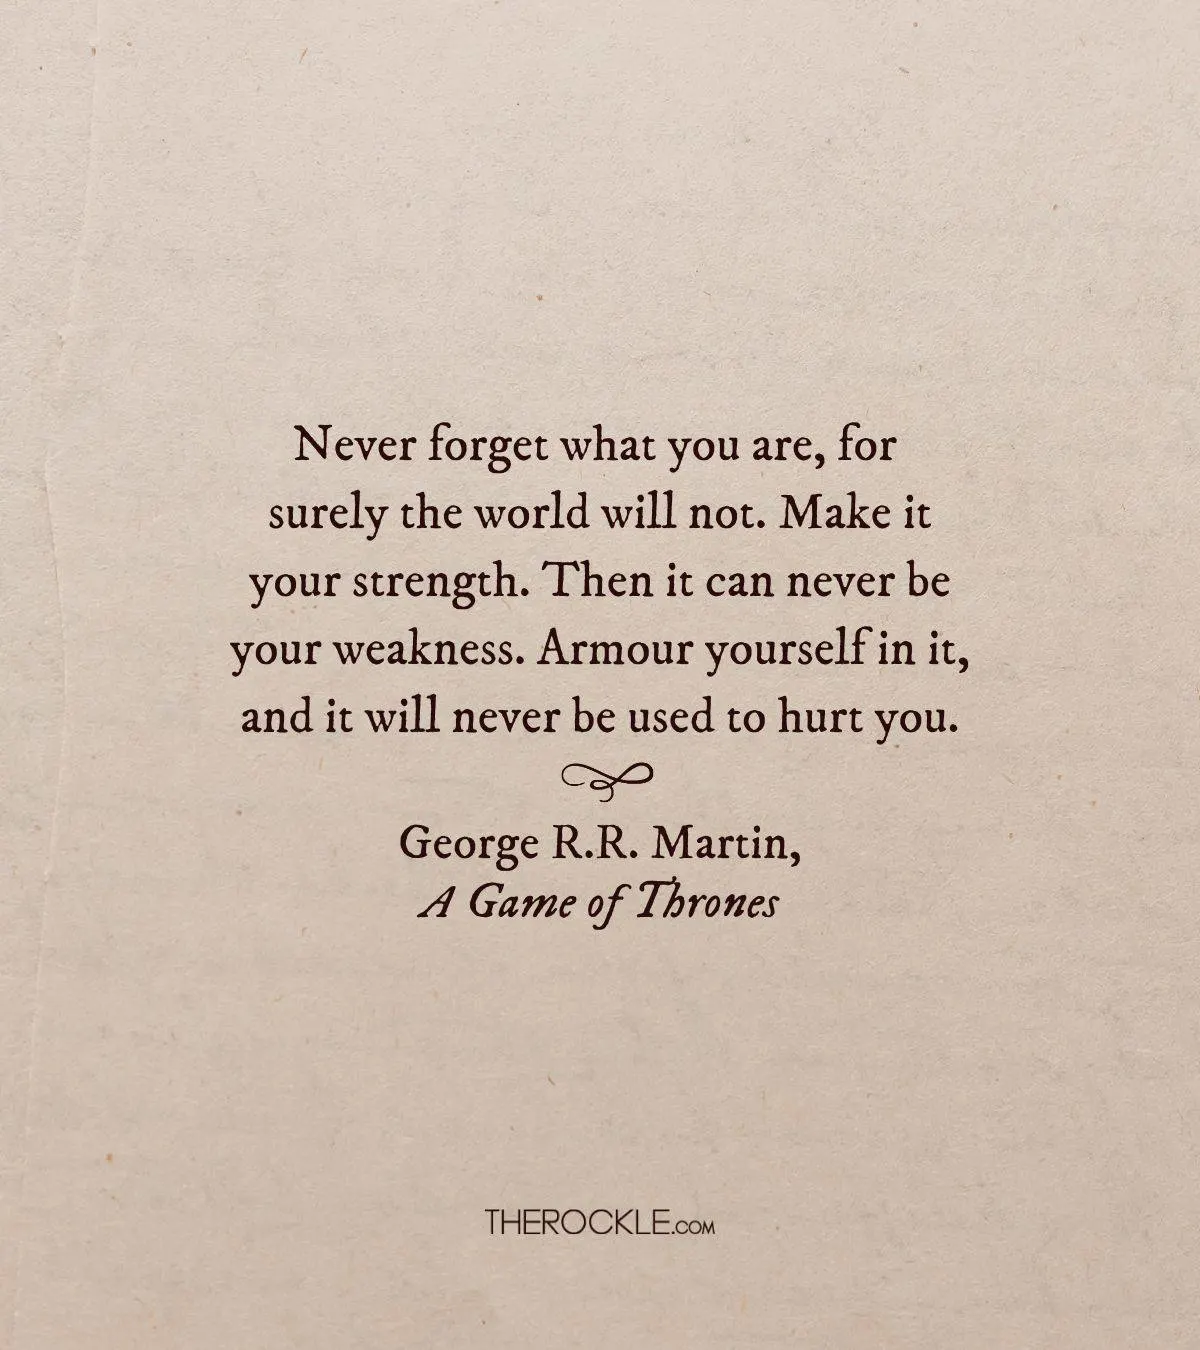 George R.R. Martin on embracing who you are